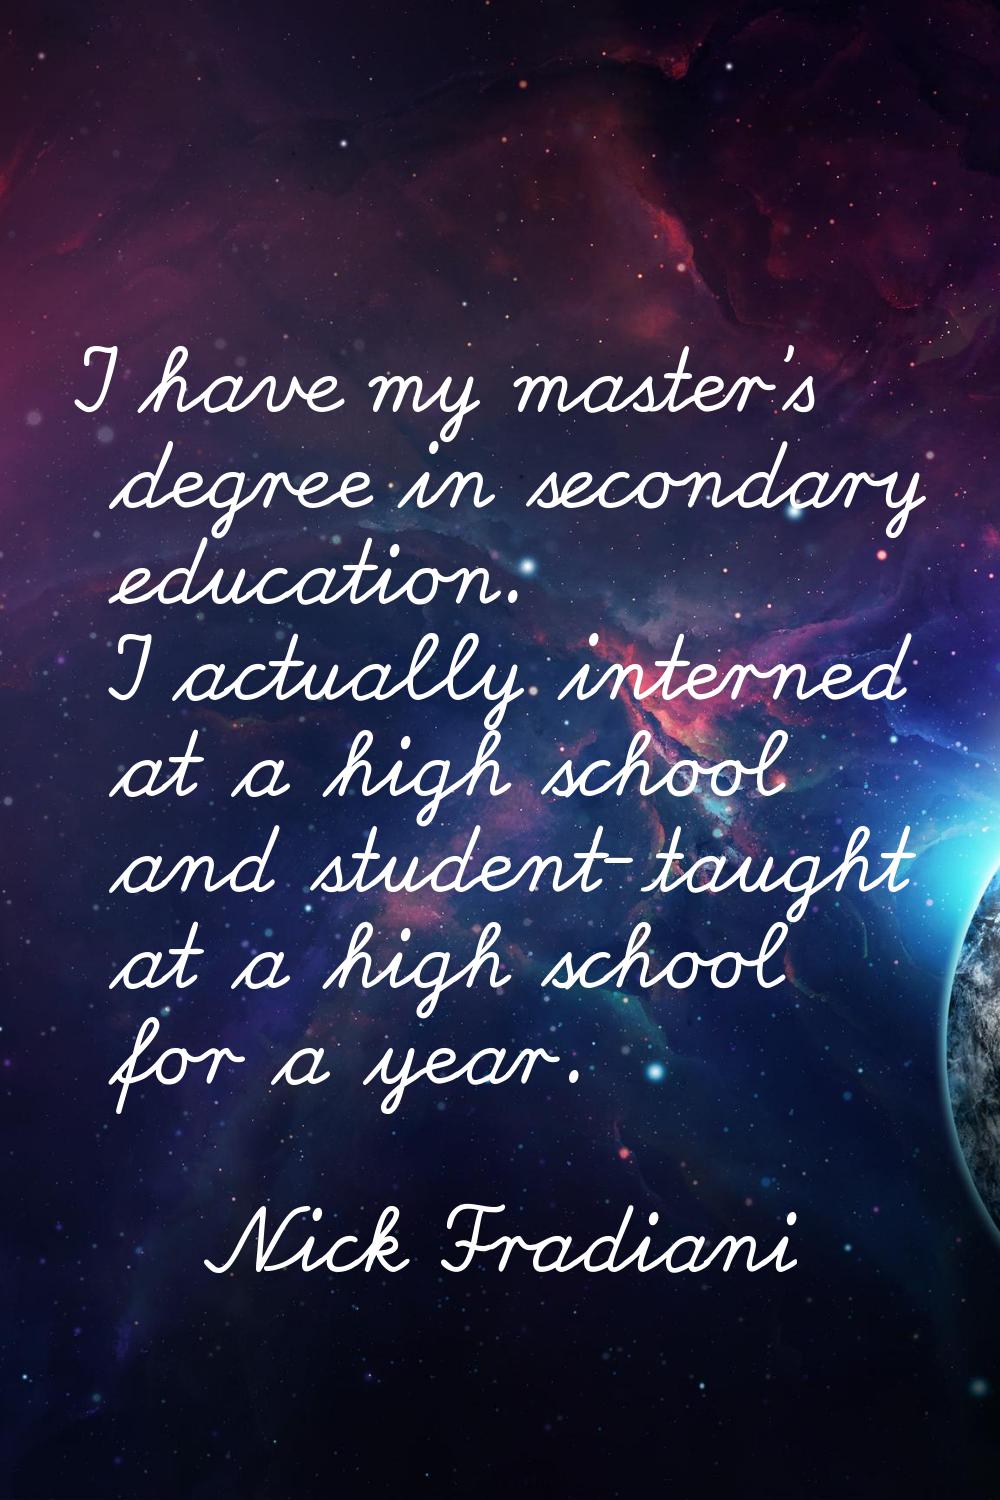 I have my master's degree in secondary education. I actually interned at a high school and student-